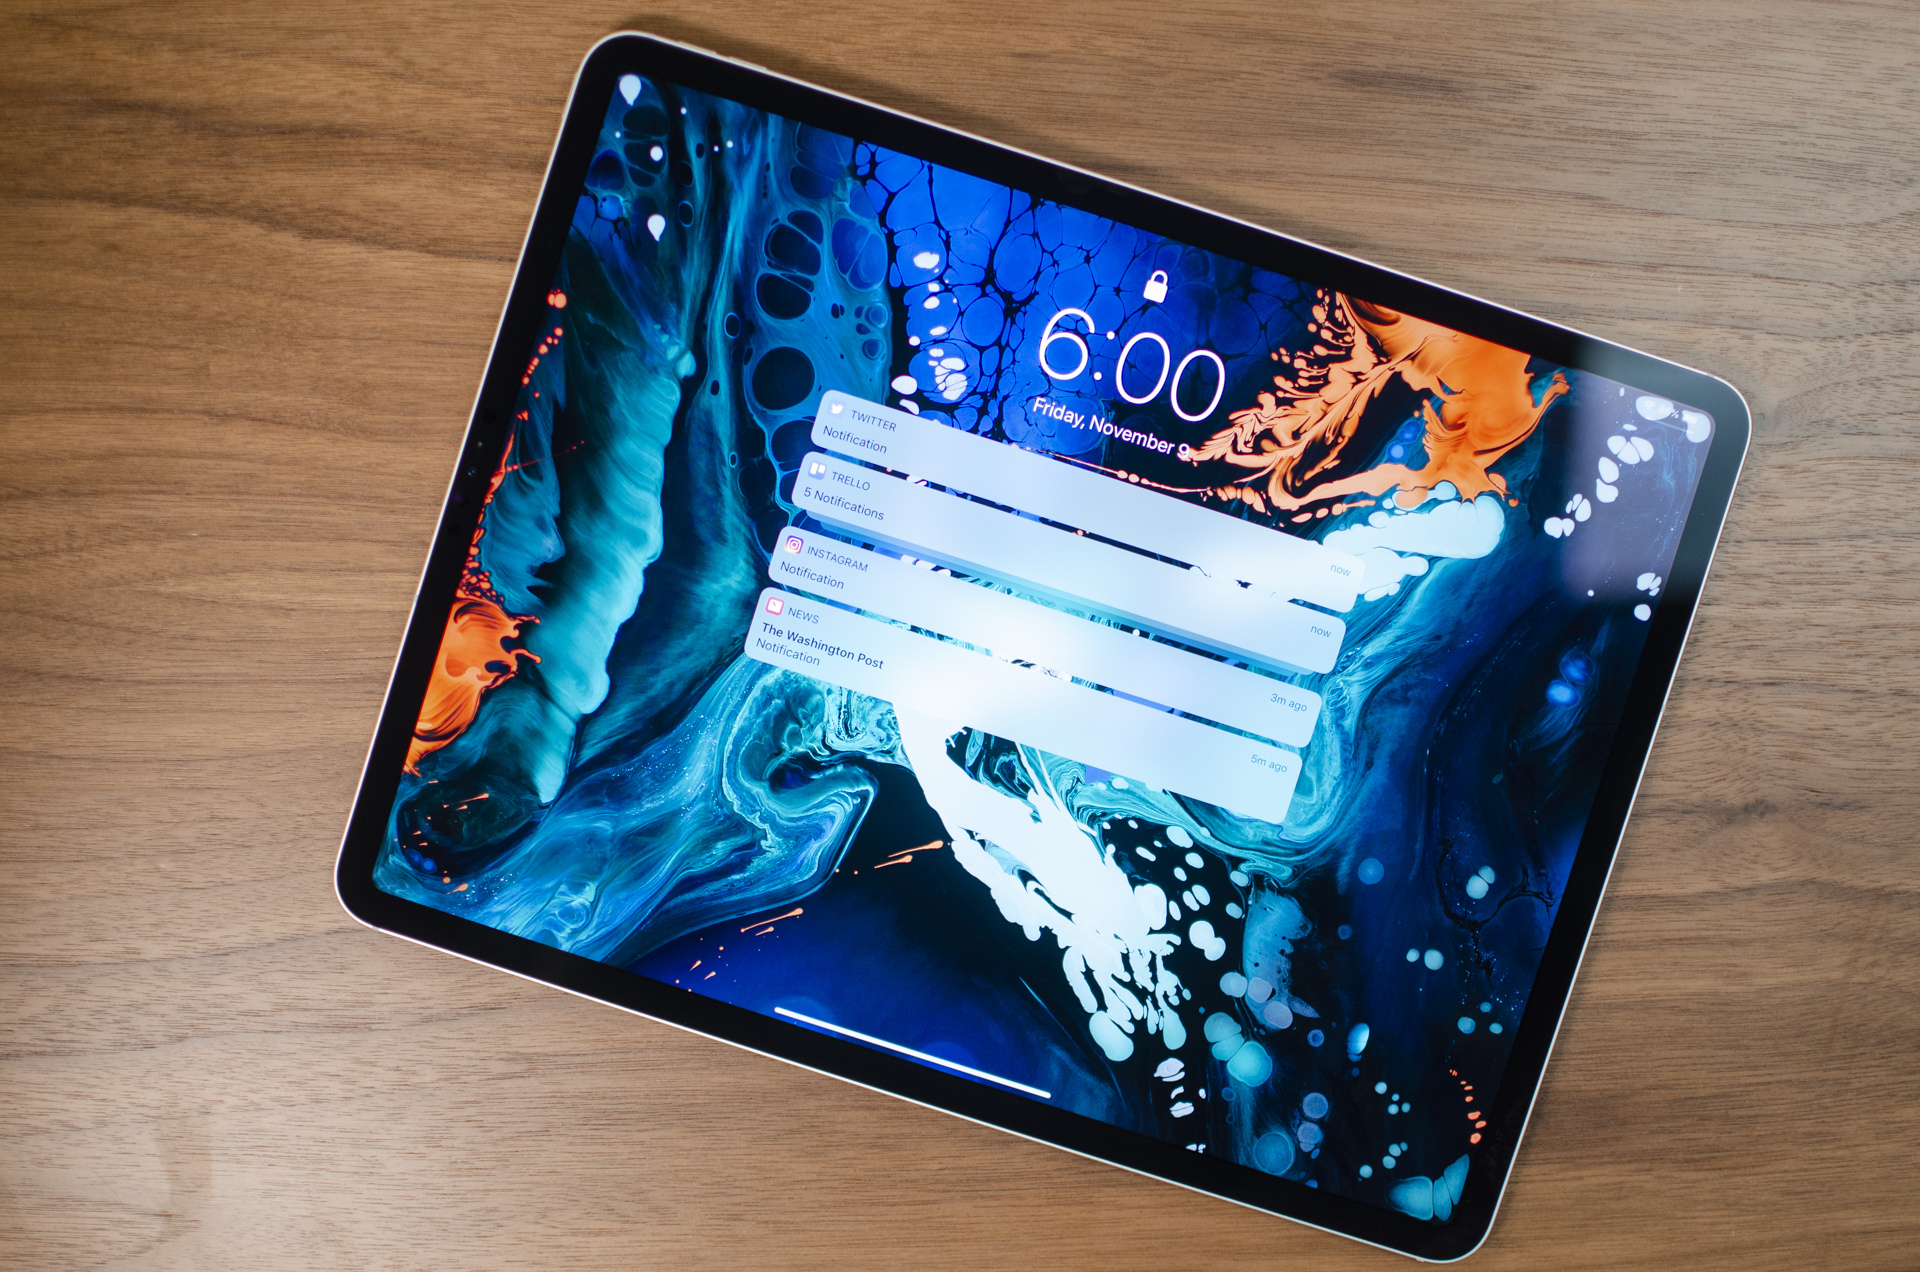 iPad Pro, 2018 review: Blazing speed, but iOS is limited - CNET